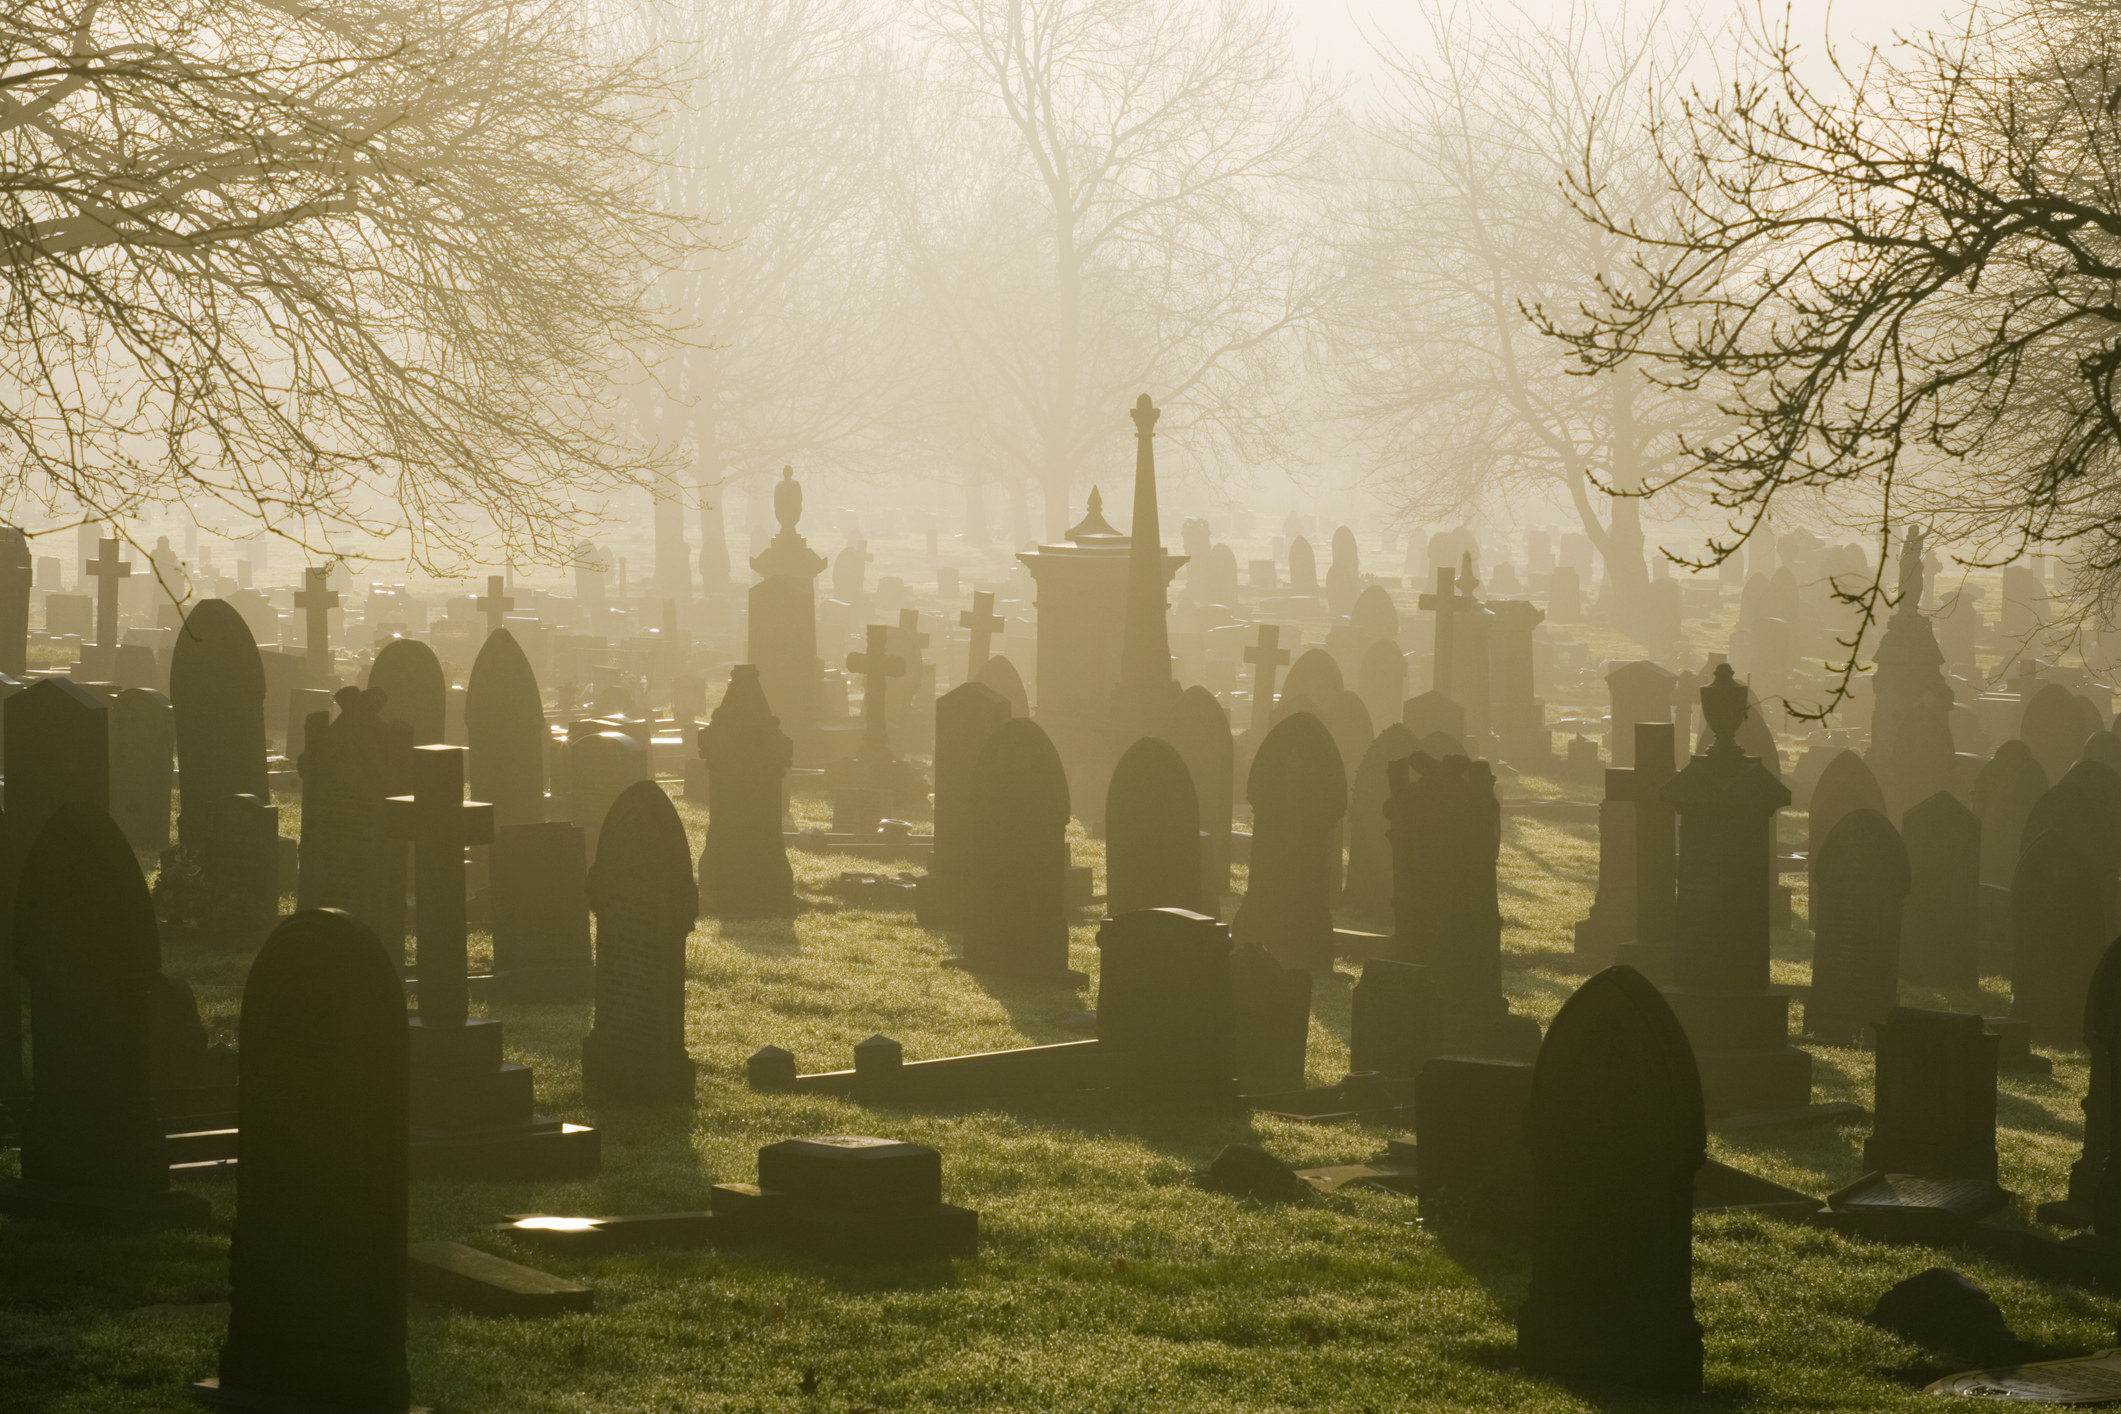 Low winter sunlight flooding through a misty cemetery in Stoke-on-Trent